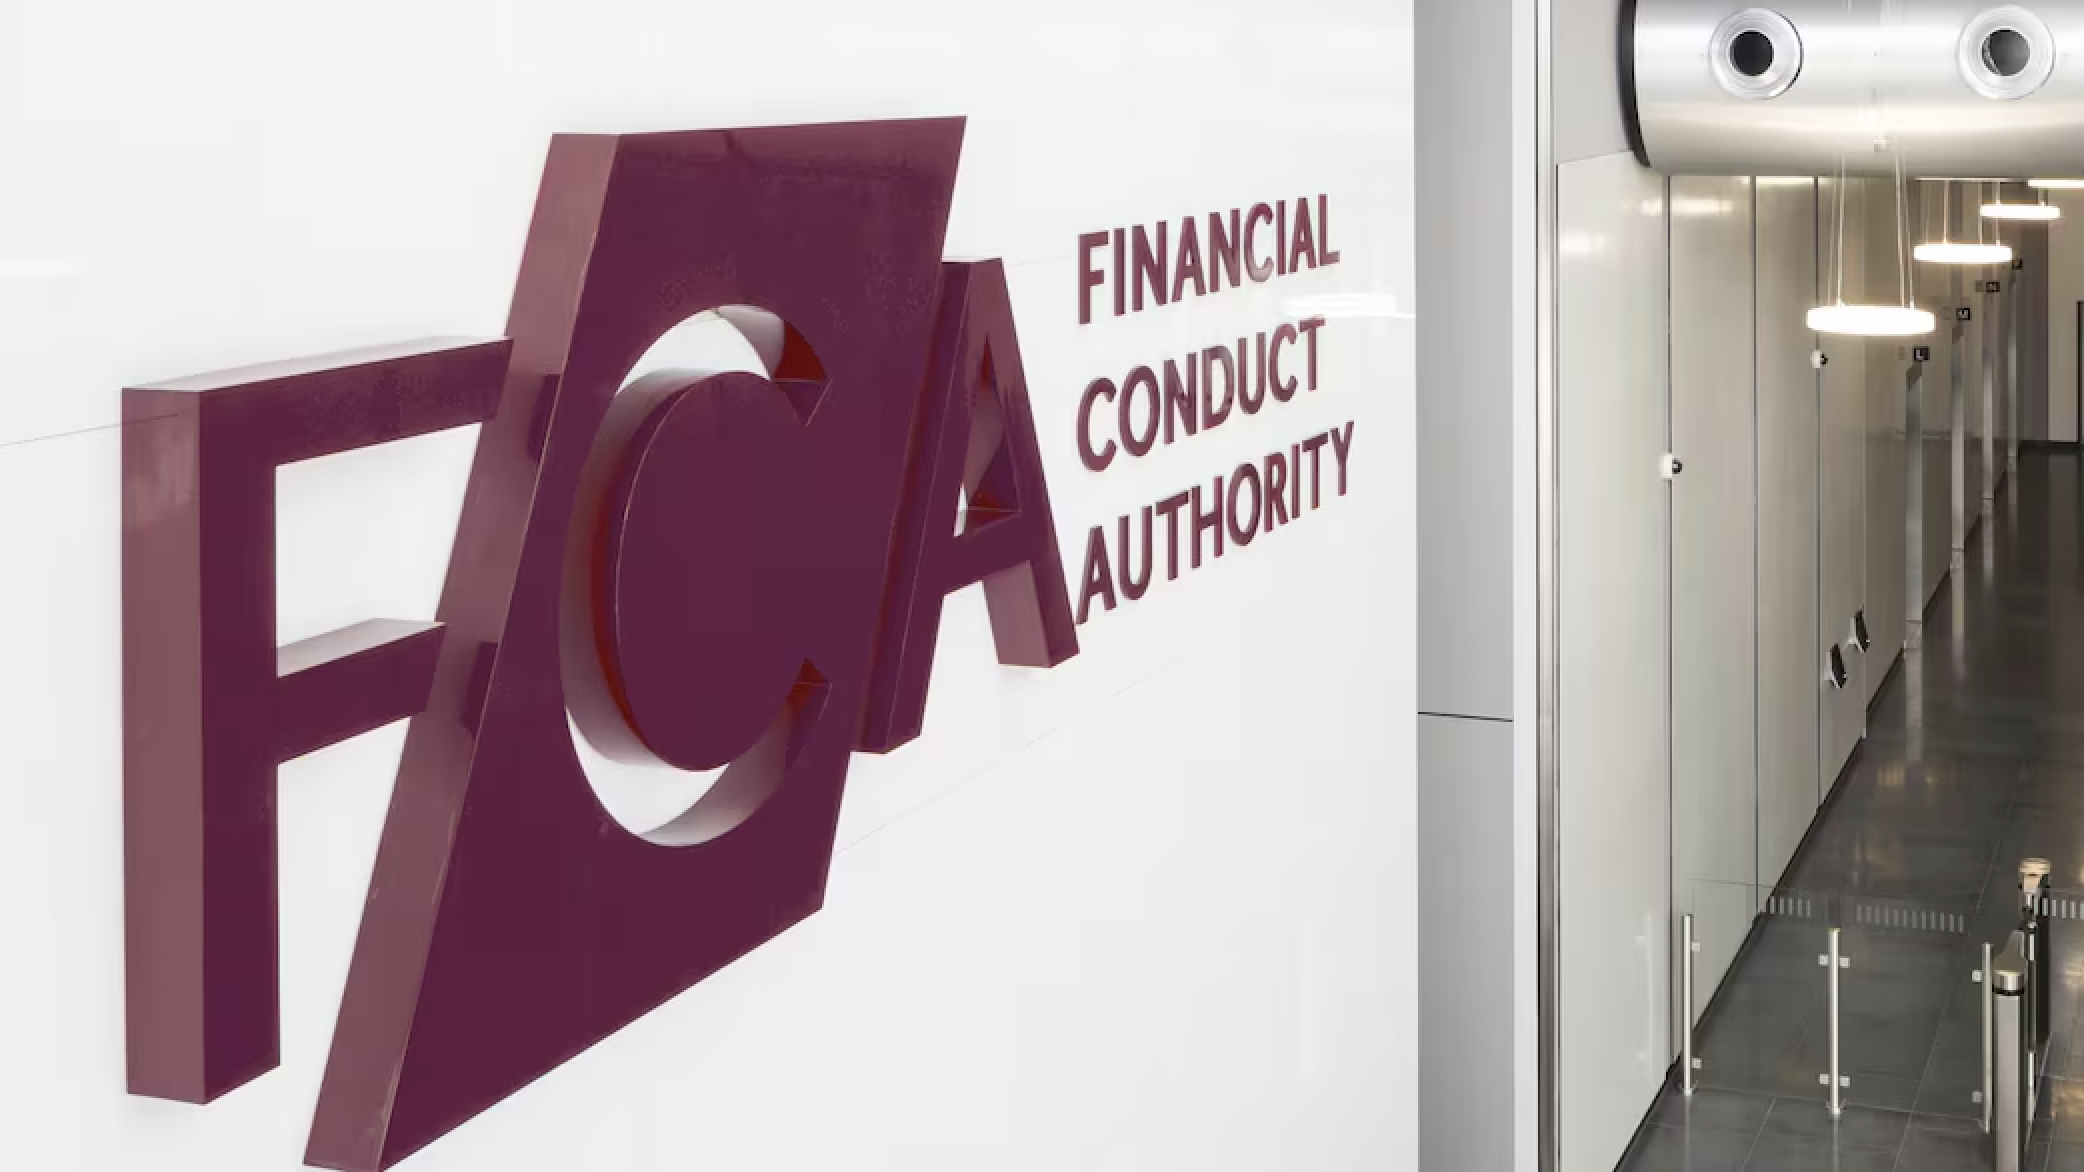 UK Regulator FCA Plans to Deliver a Market Abuse Regime for Crypto This Year.